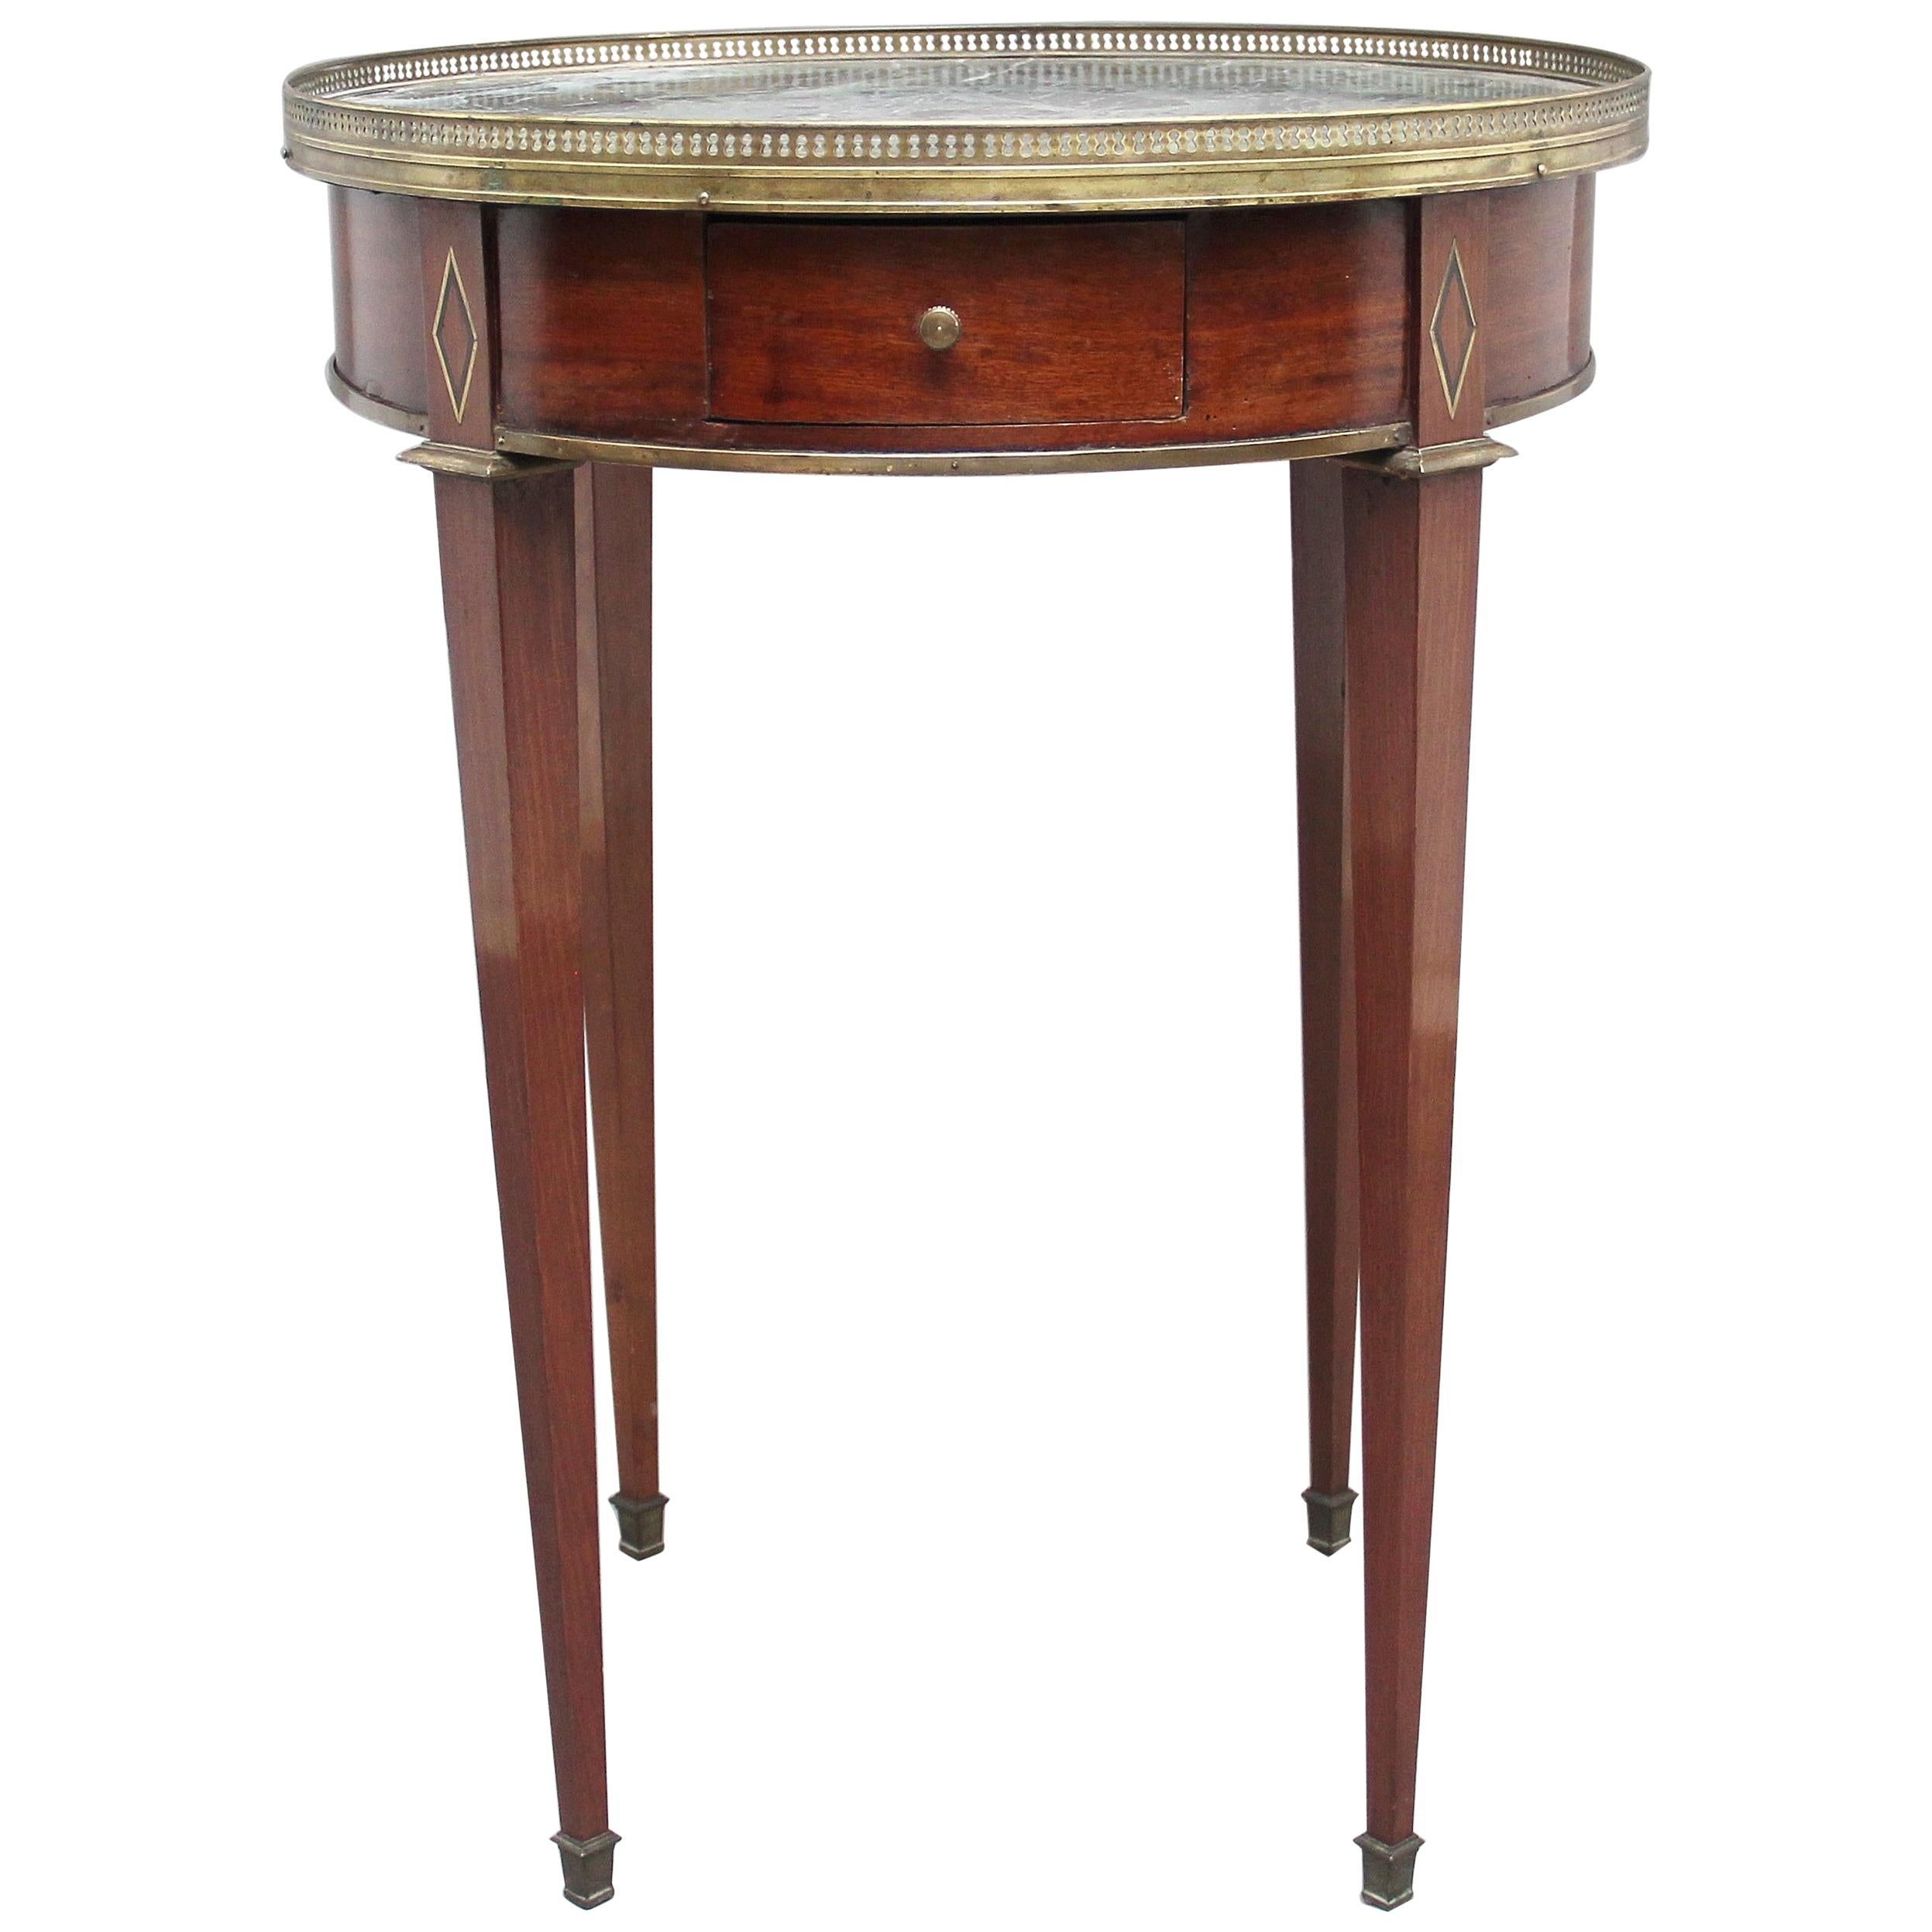 19th Century Mahogany and Marble-Top Occasional Table